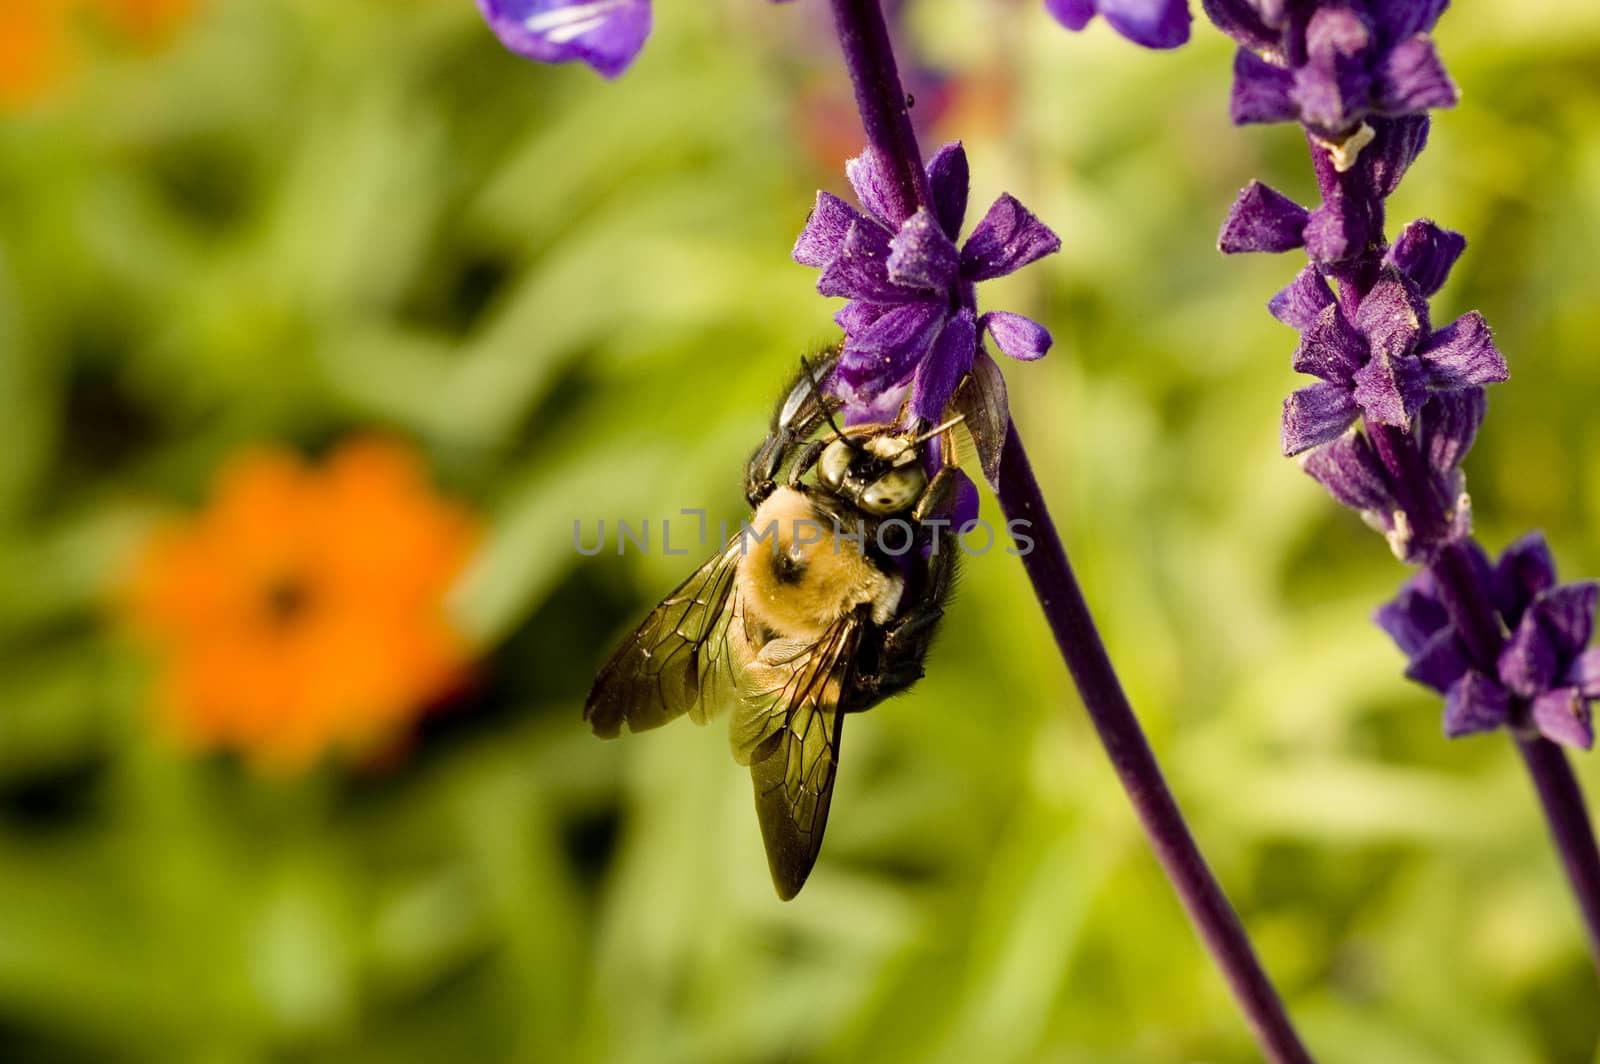 Macro photography of an insect and a purple flower at the botanical garden.